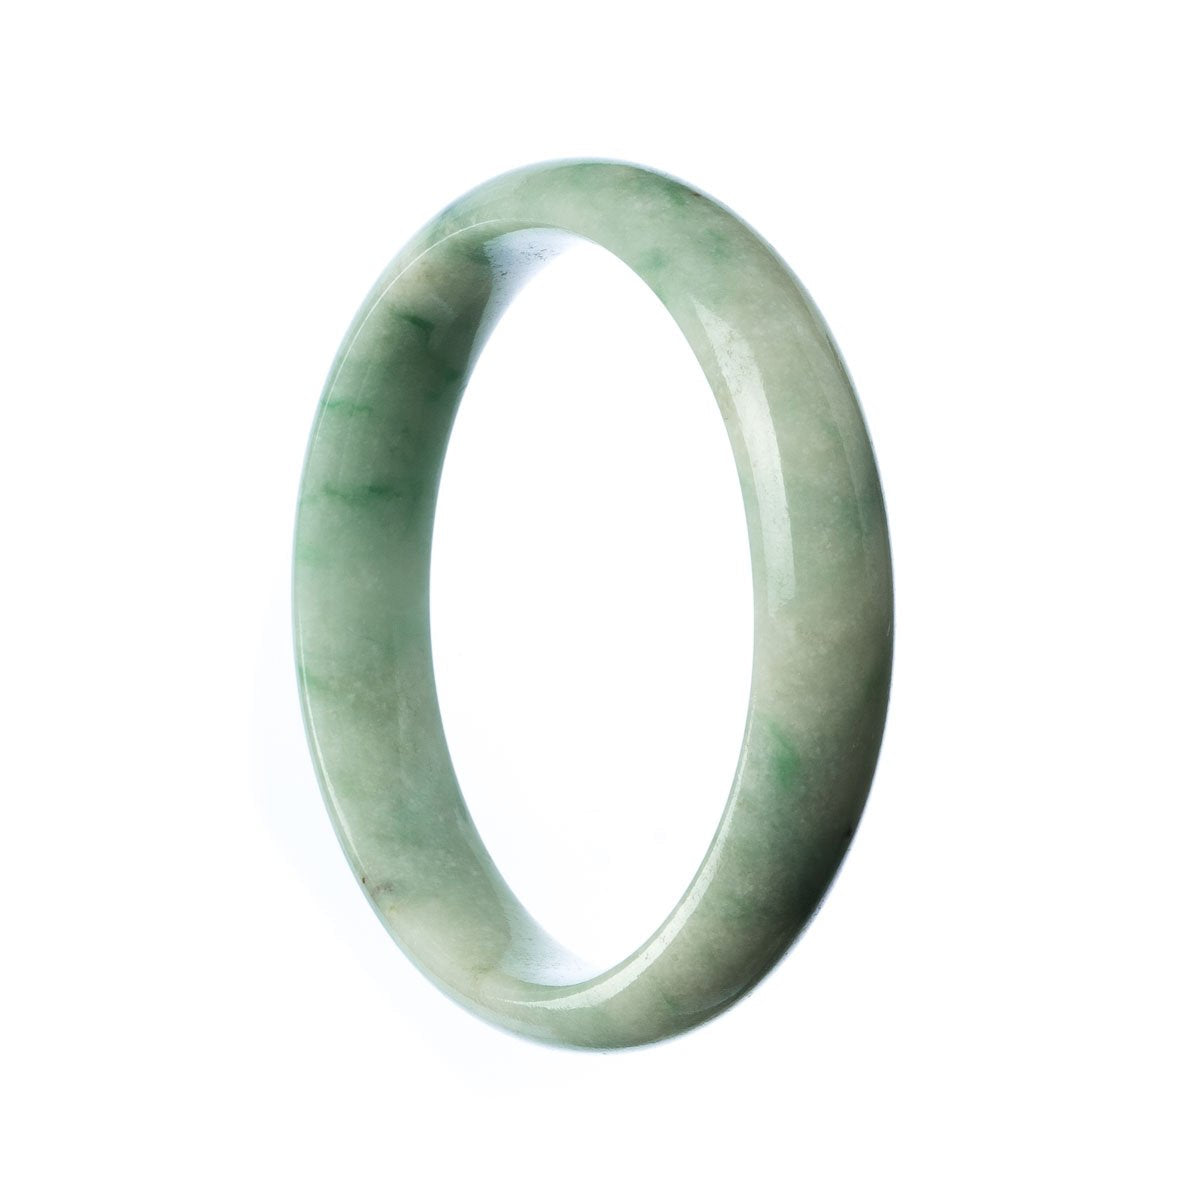 A half-moon shaped pale green traditional jade bangle, 57mm in size, showcasing the genuine Type A jade quality. A product from MAYS.